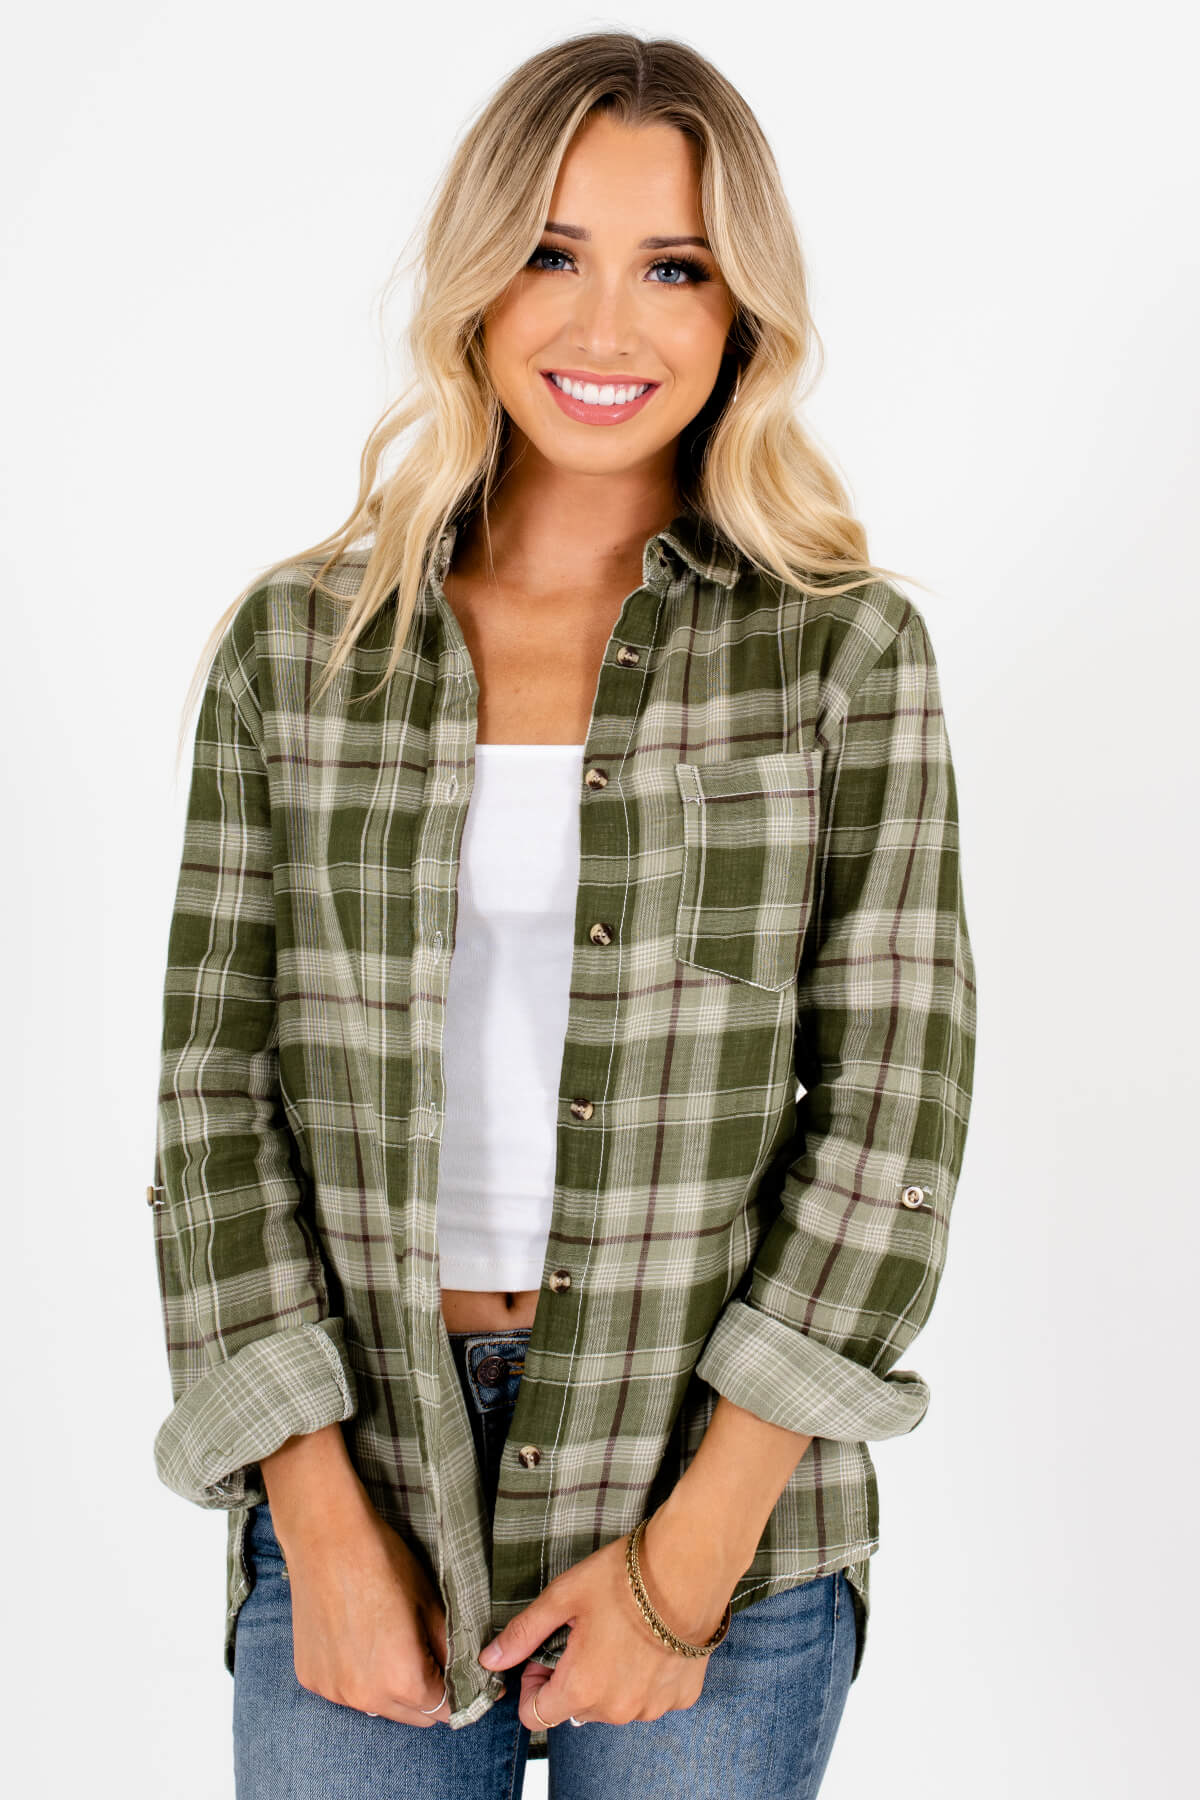 Never A Dull Moment Green Plaid Top | Boutique Tops for Women - Bella ...